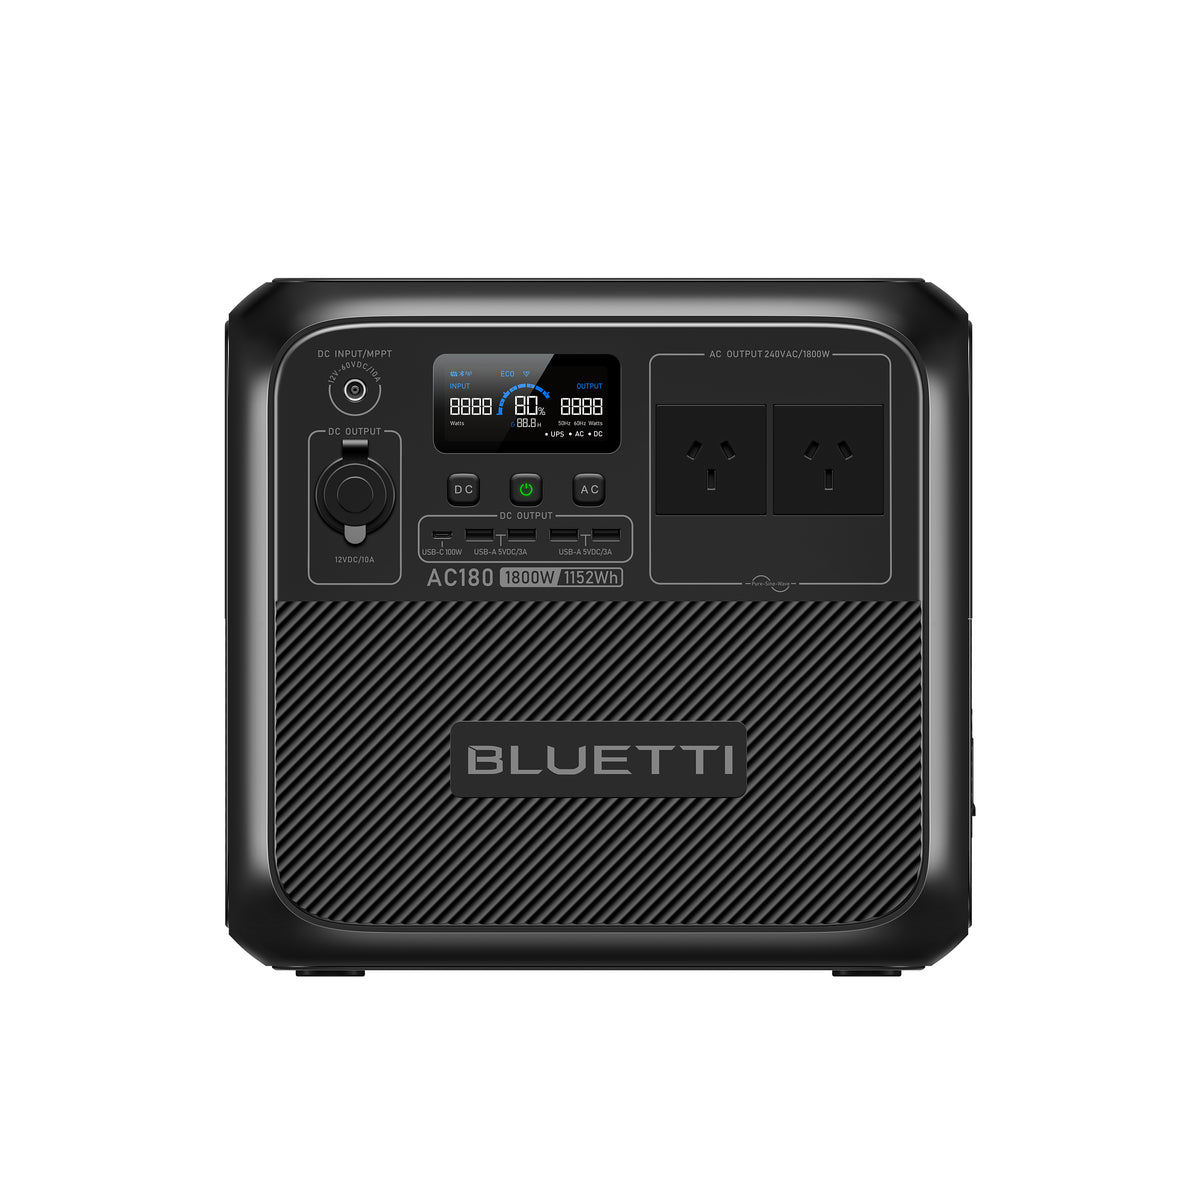 BLUETTI Portable Power Station EB70S, 716Wh LiFePO4 Battery Backup w/ 4  800W AC Outlets (1,400W Peak), 100W Type-C, Solar Generator for Road Trip